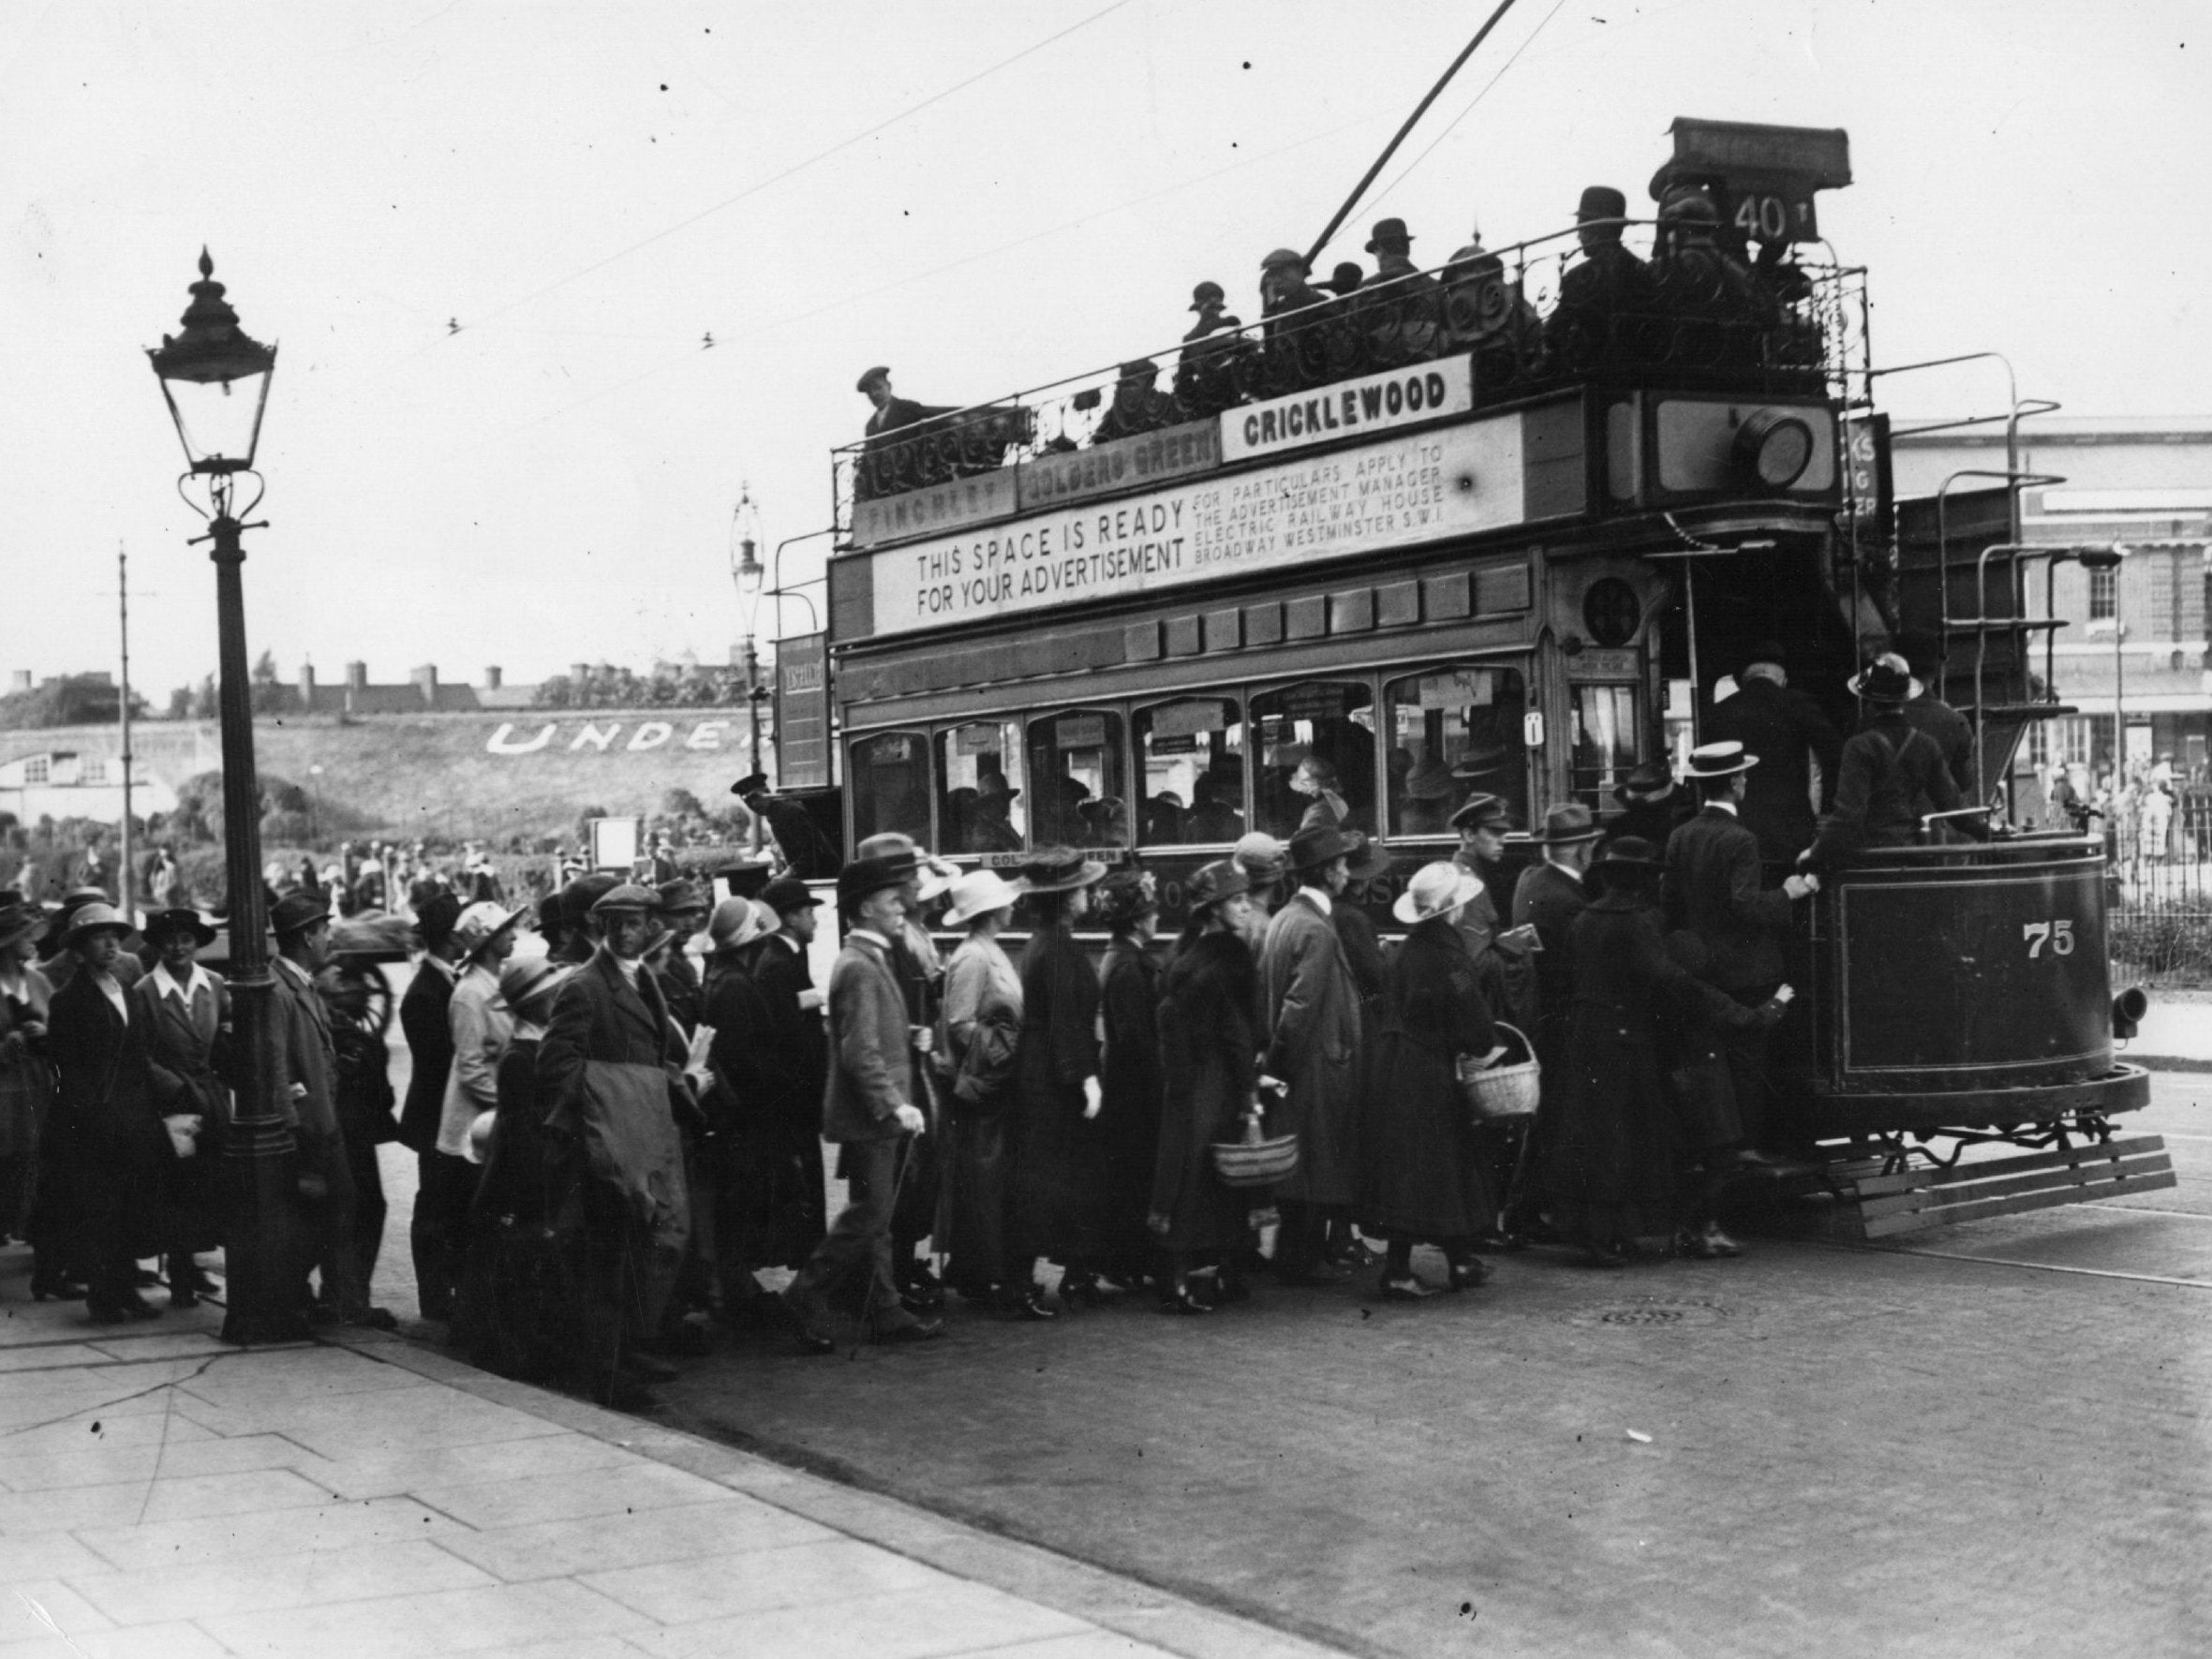 Golders Green, north London, 1919 – the year the ministry of transport was formed